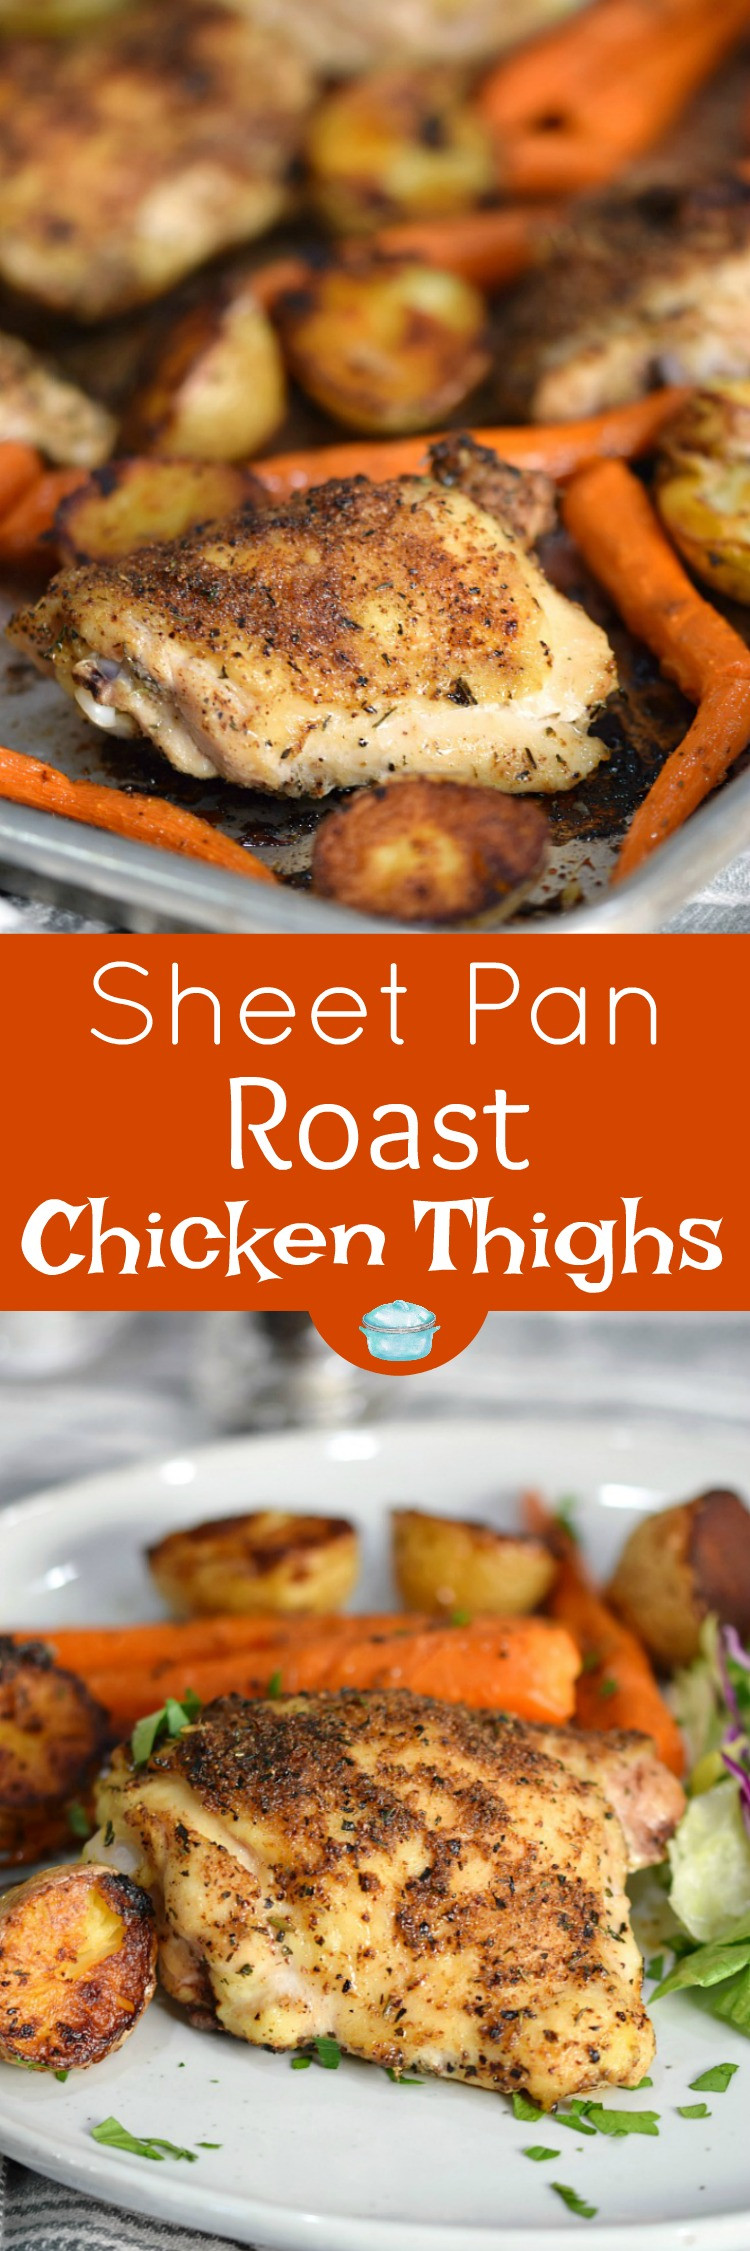 Sheet Pan Dinners Chicken Thighs
 Sheet Pan Roast Chicken Thighs Cooking With Curls